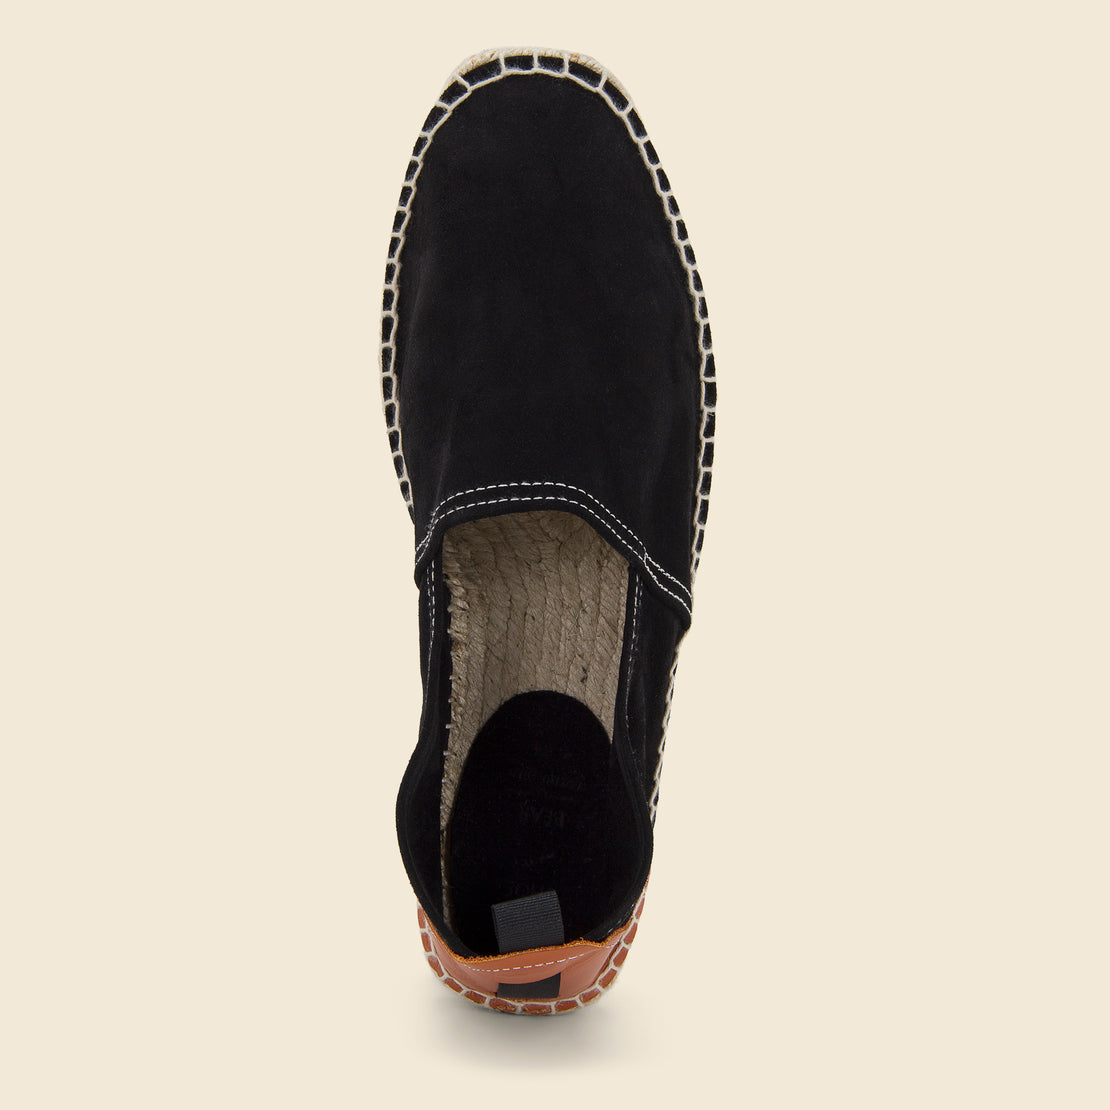 Montauk Slip On - Black - Shoe the Bear - STAG Provisions - Shoes - Athletic